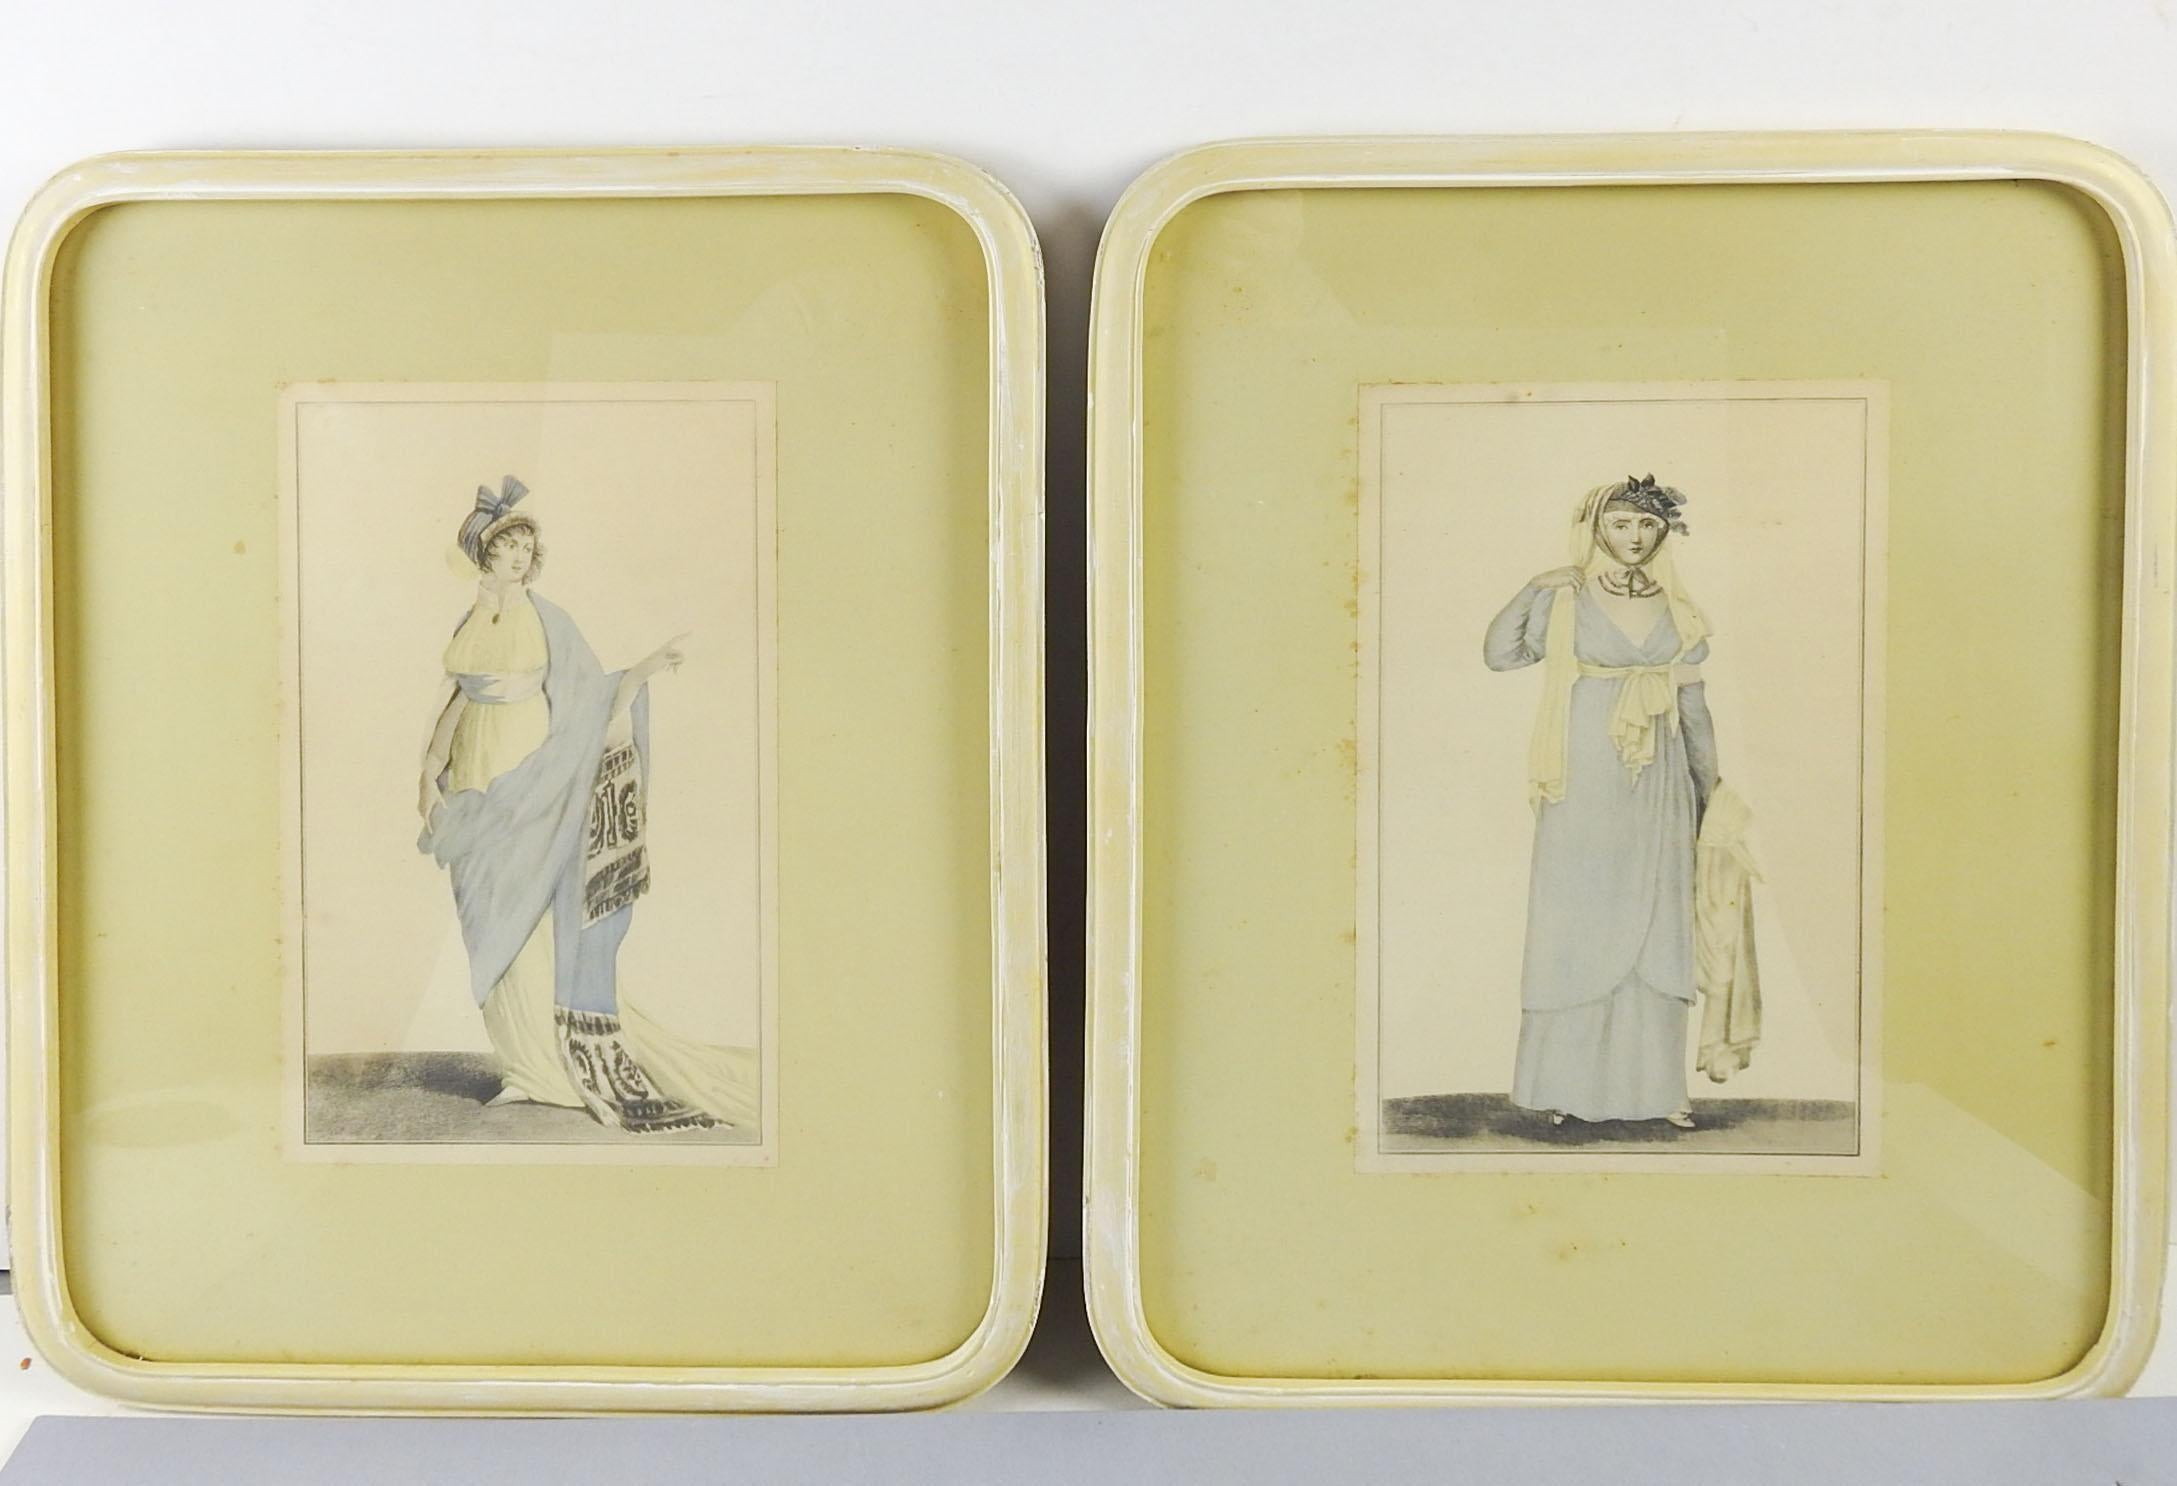 Pair of Regency era fashion plates, circa 1810 blue and yellow gowns. Displayed in custom round cornered painted yellow frames, mounted to mat board under glass. Age toning, foxing to mat, scuffing to frames.